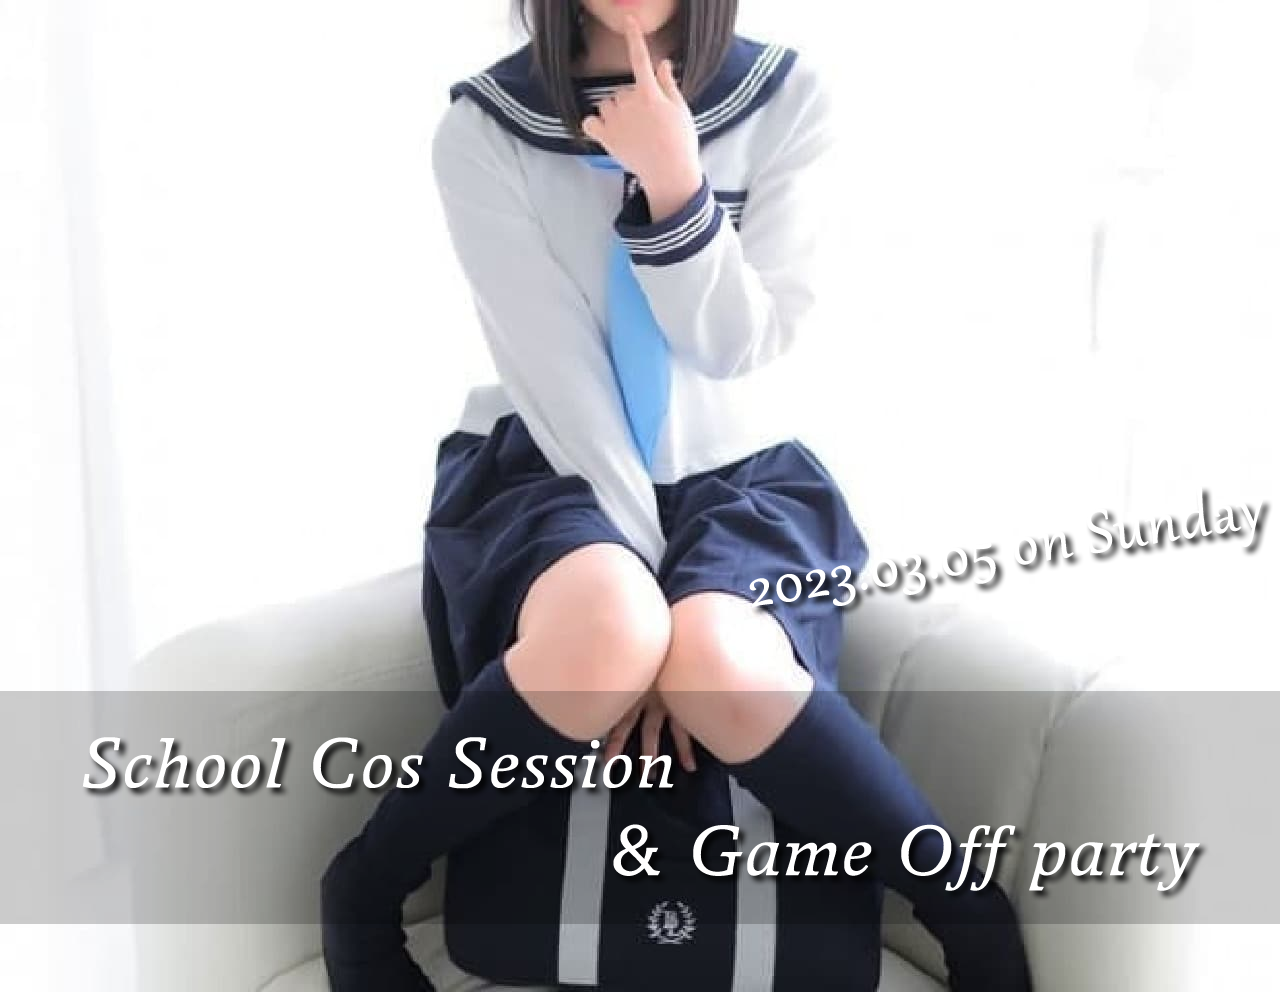 School Cos Session & Game Off Party